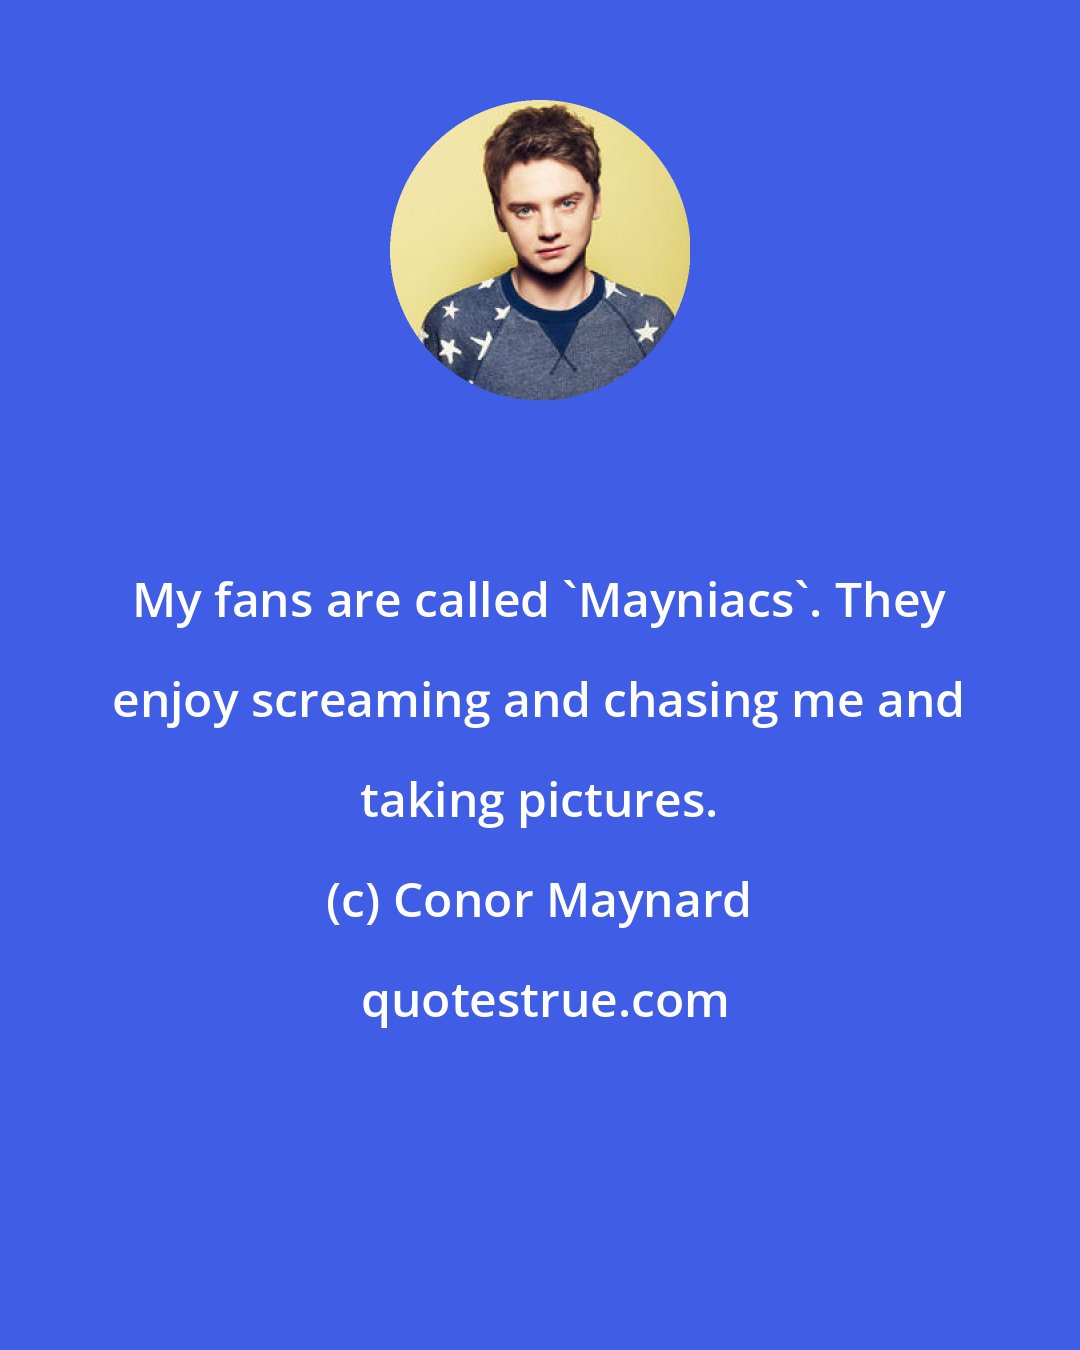 Conor Maynard: My fans are called 'Mayniacs'. They enjoy screaming and chasing me and taking pictures.